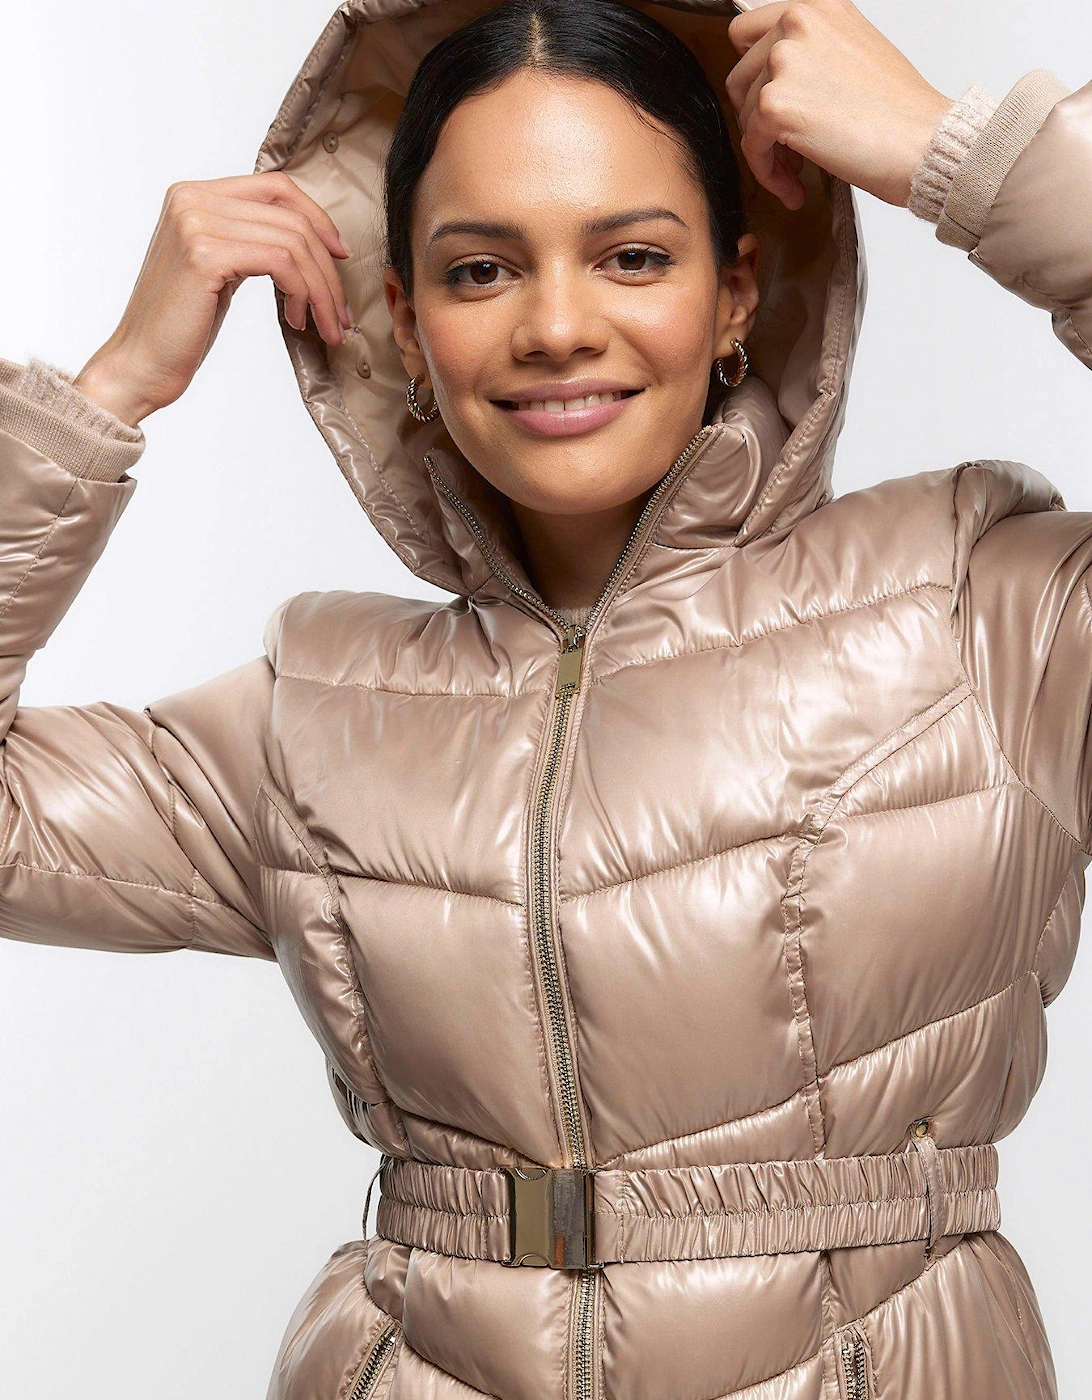 Glam Fitted Padded Coat - Light Brown